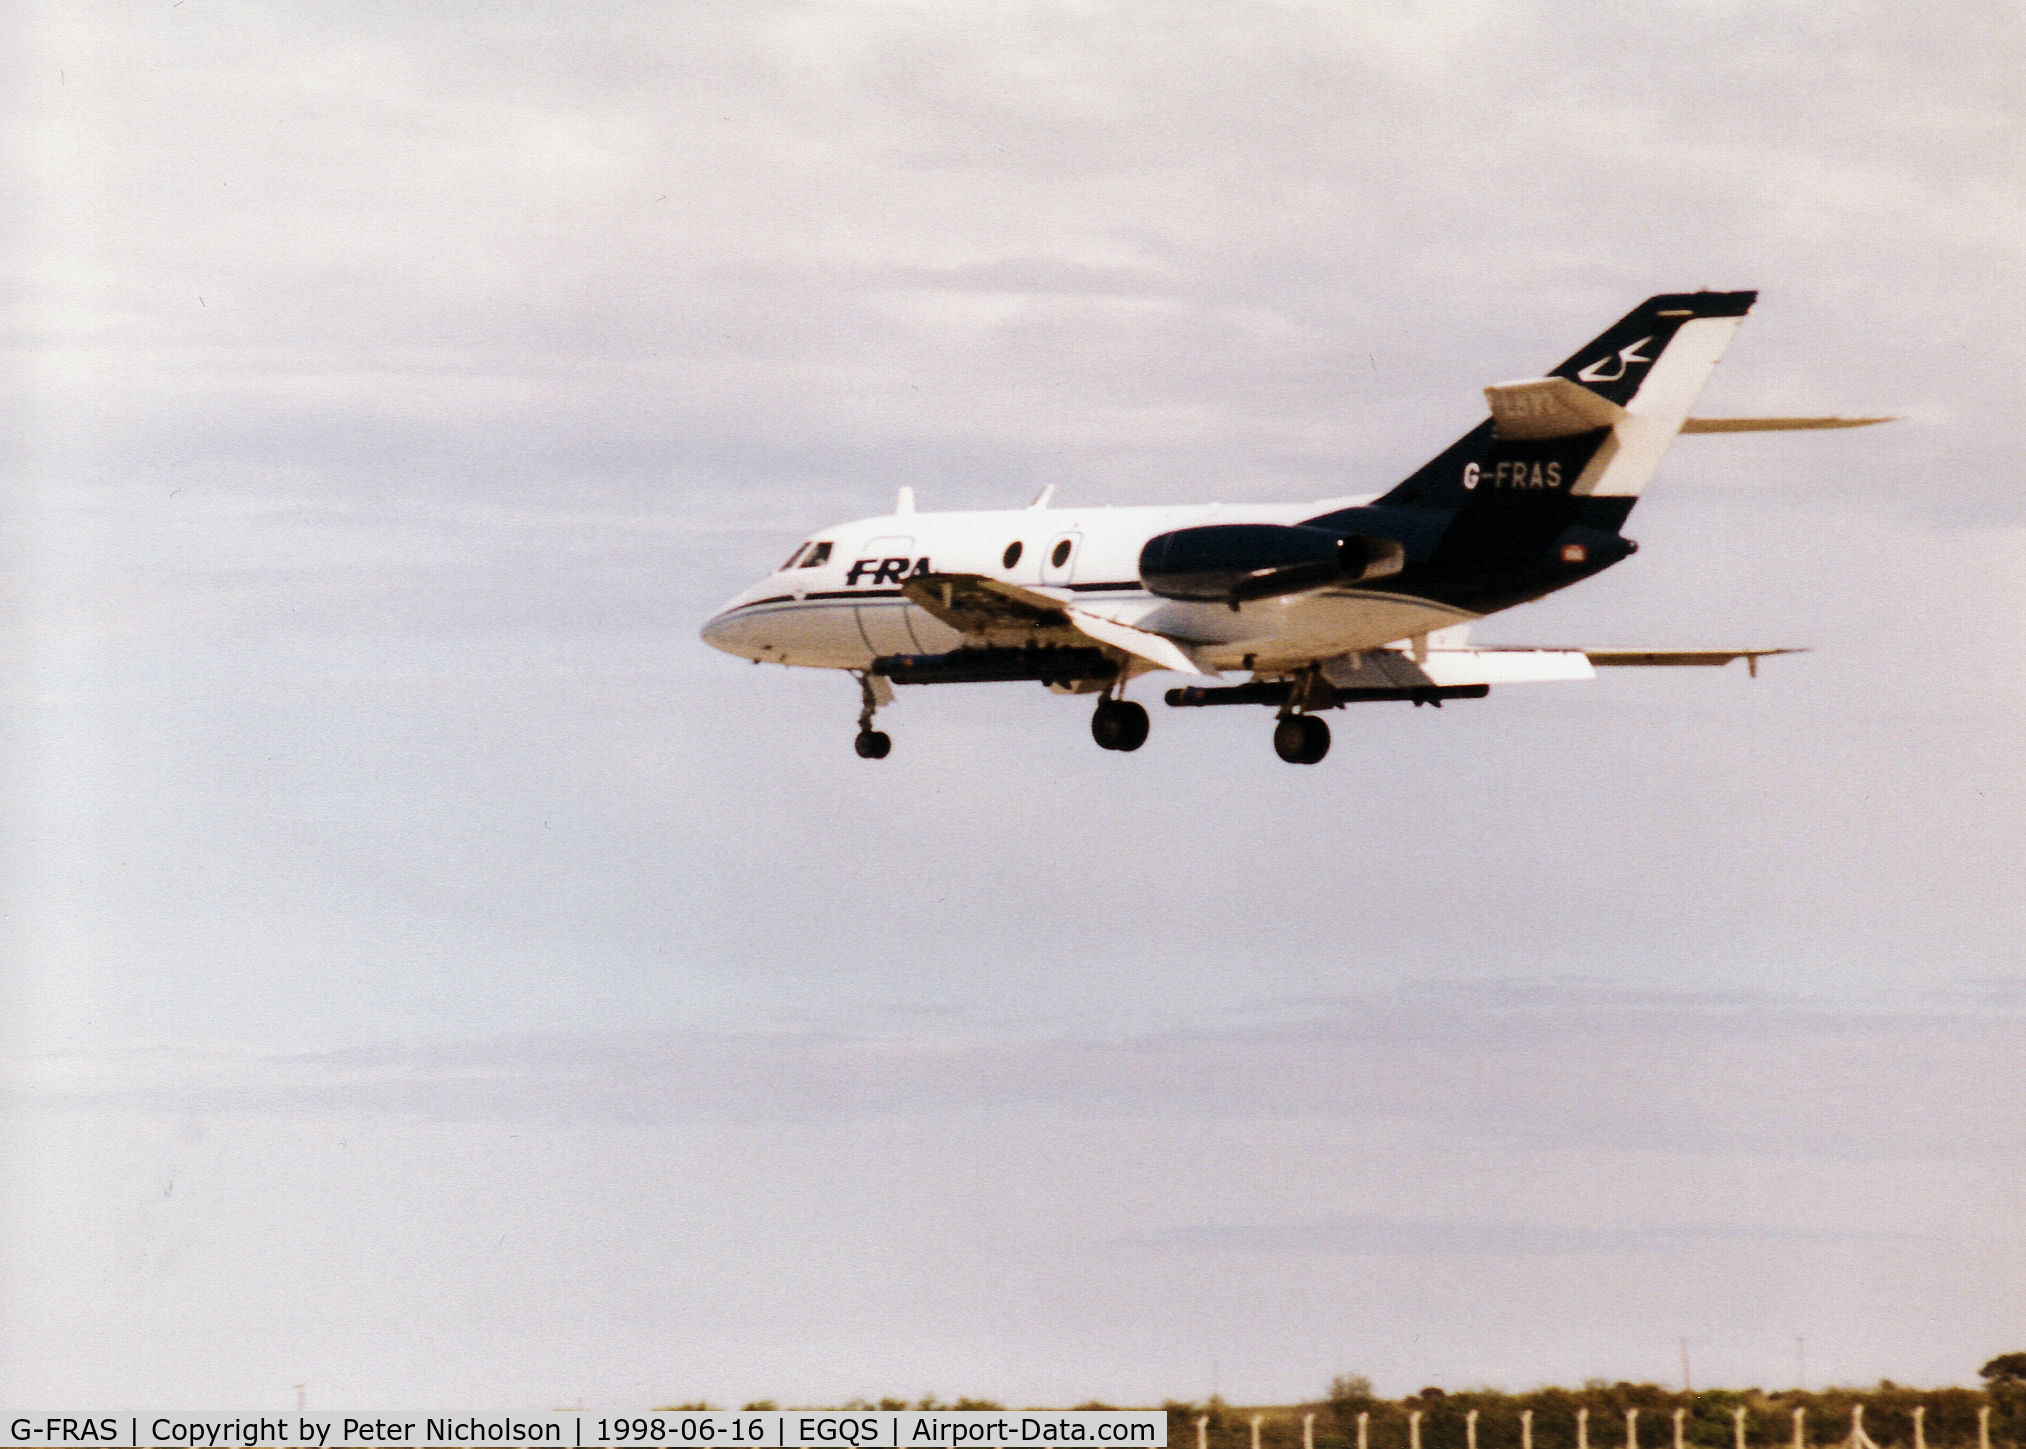 G-FRAS, 1967 Dassault Falcon (Mystere) 20DC C/N 82, FRA Falcon 20, callsign Broadway 87, landing on Runway 05 at RAF Lossiemouth after a mission during the 1998 Joint Maritime Course.